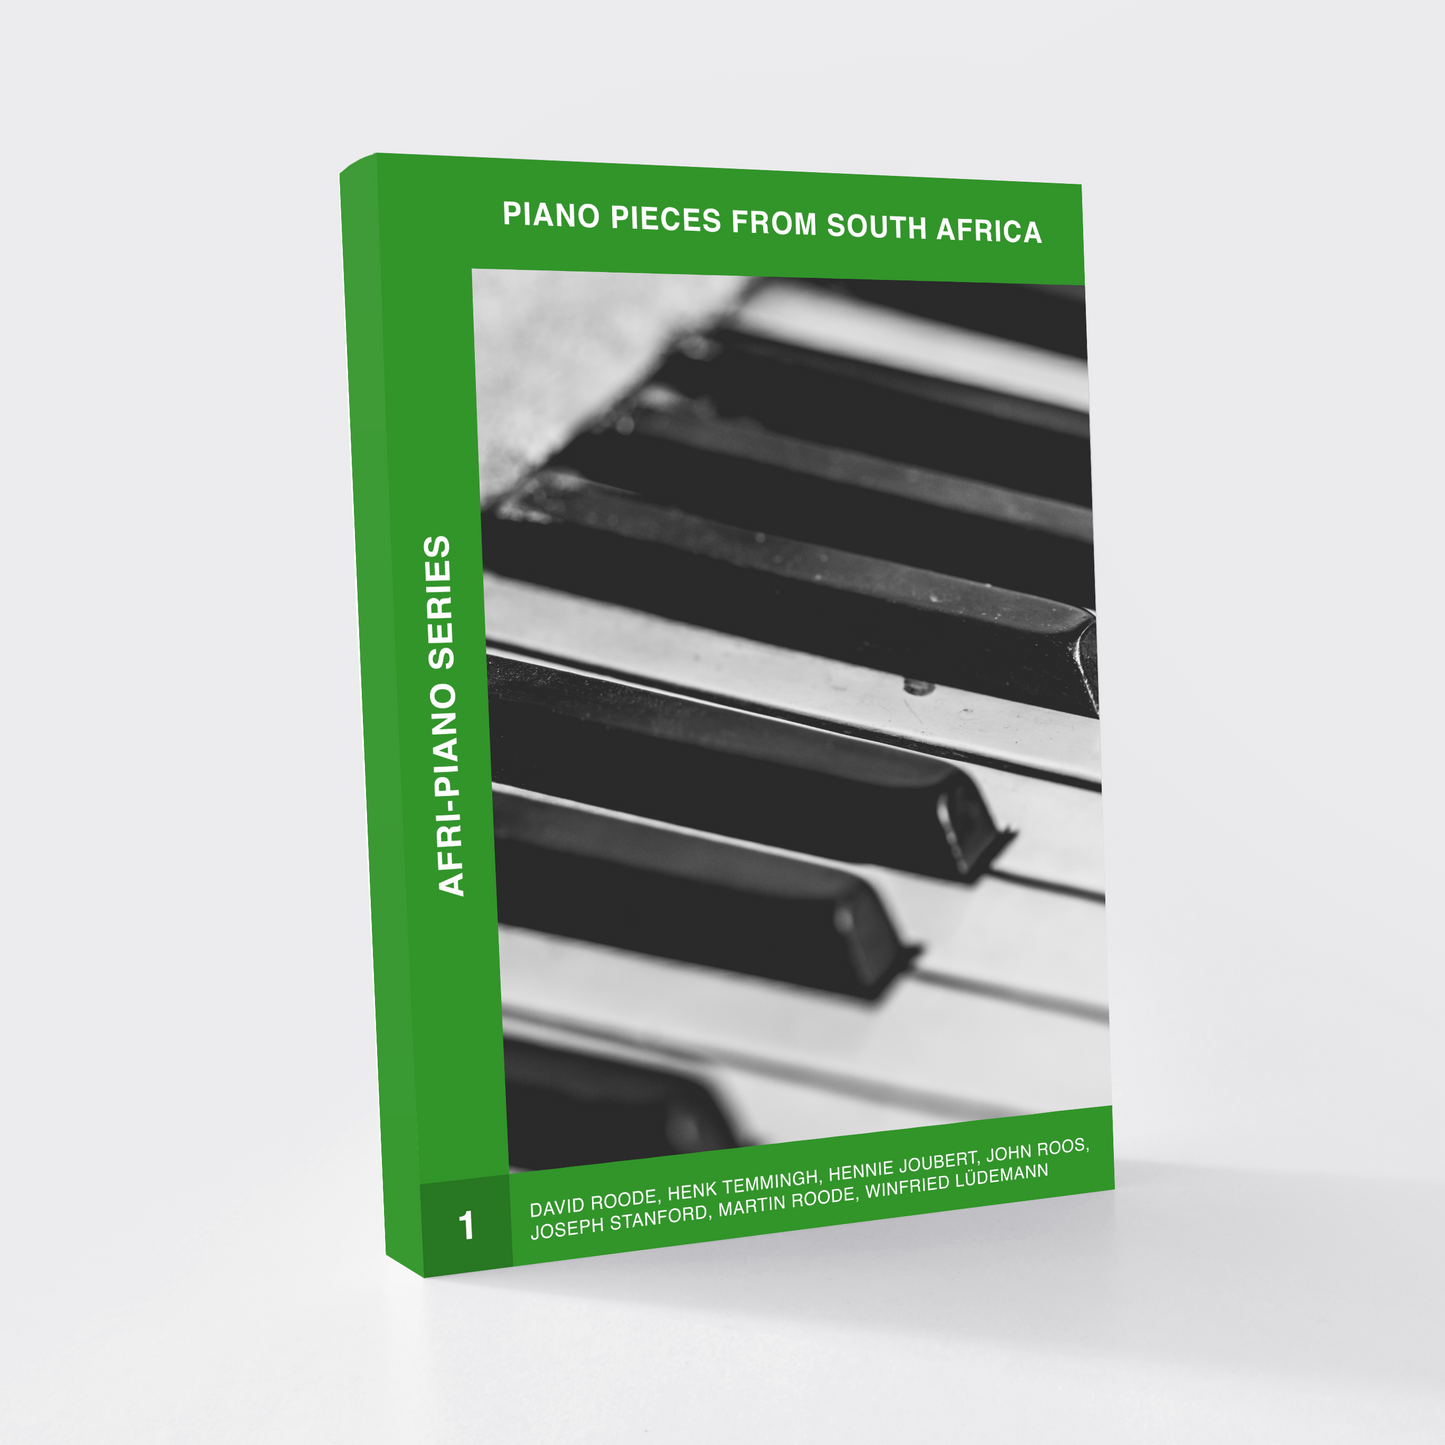 Afri-Piano Series Volume 1: Piano Pieces from South Africa